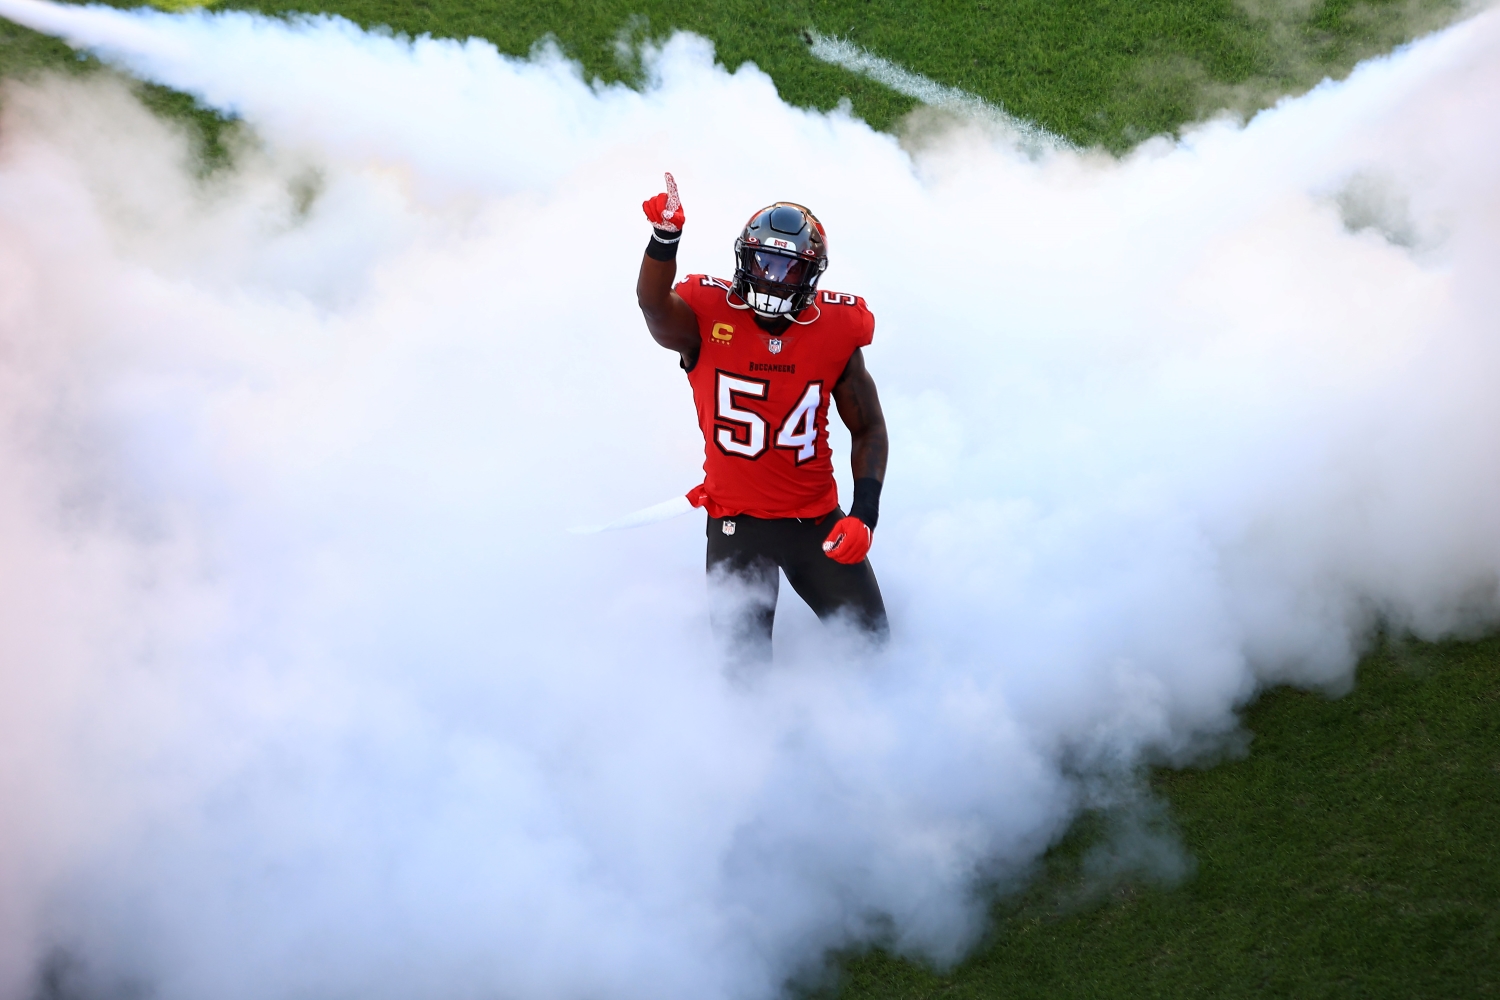 Tampa Bay Buccaneers linebacker Lavonte David points to the crowd after being introduced prior to a game.